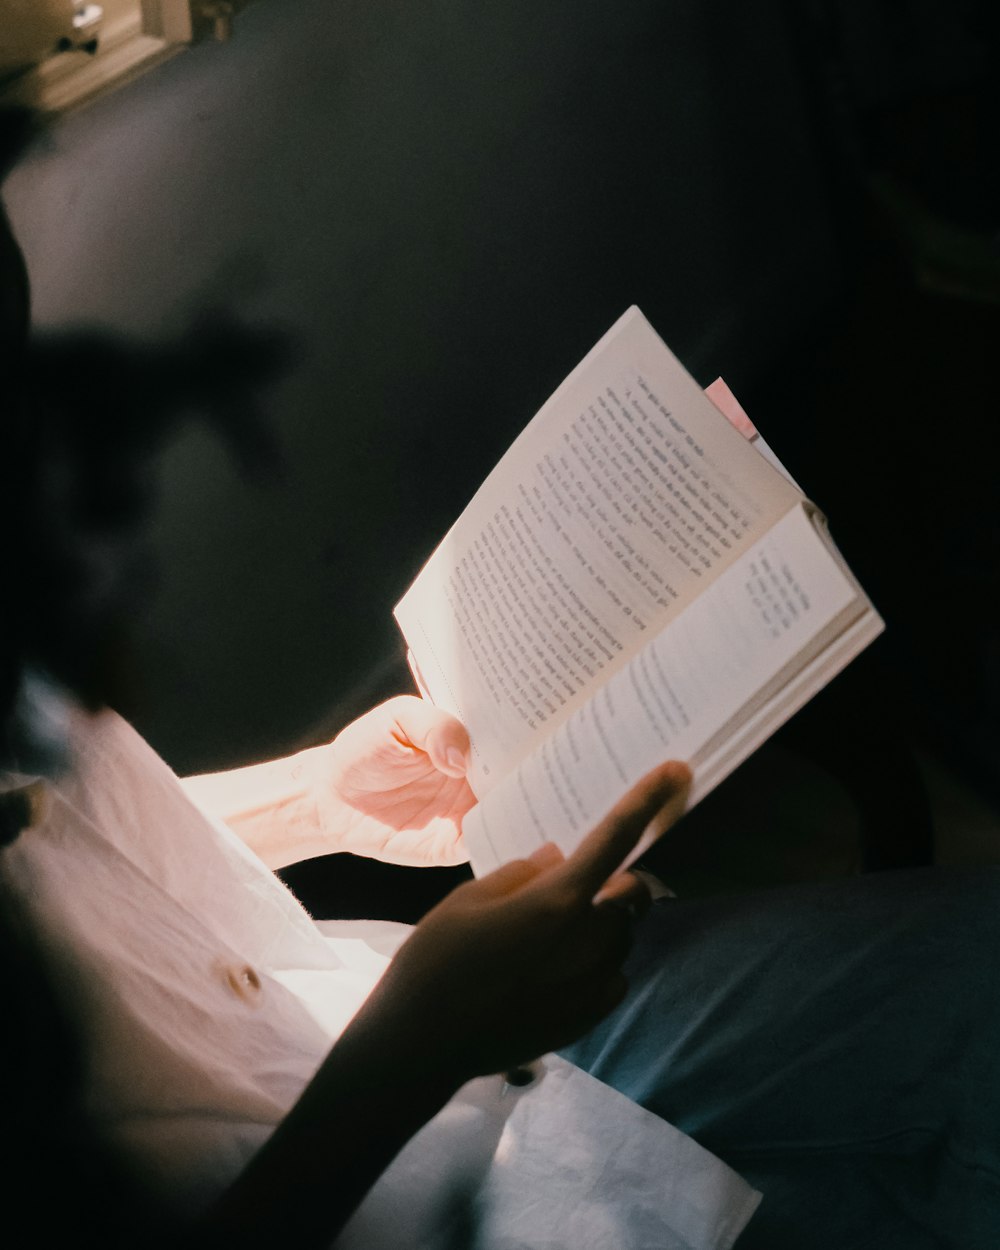 a person is reading a book in the dark